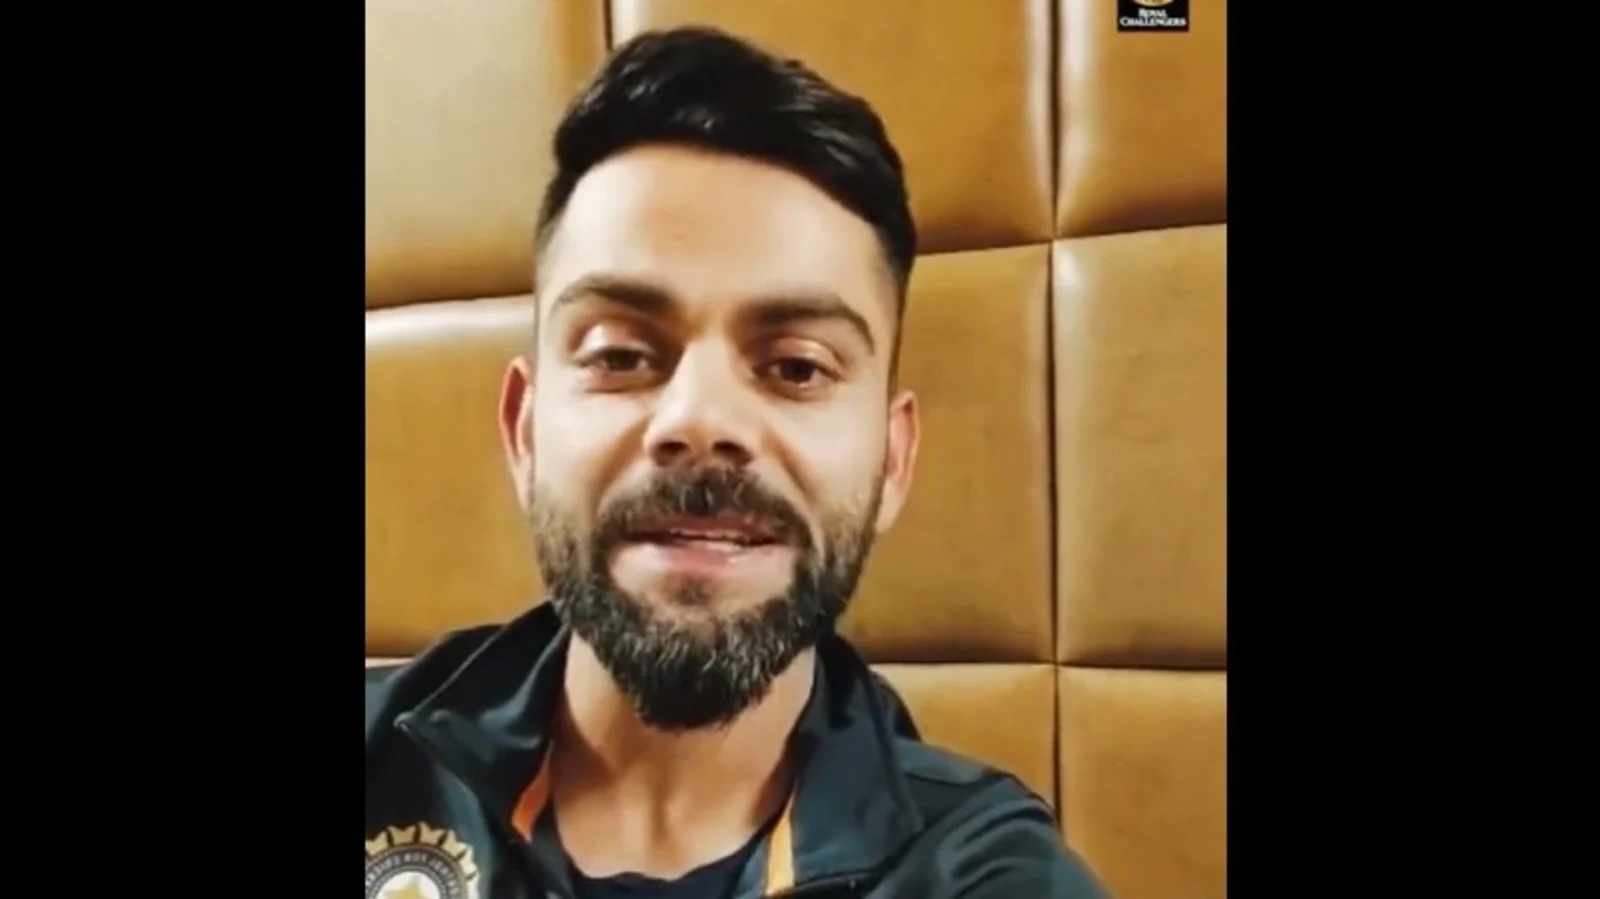 Virat Kohli leaves RCB fans on a cliffhanger with a special message ahead of captaincy announcement